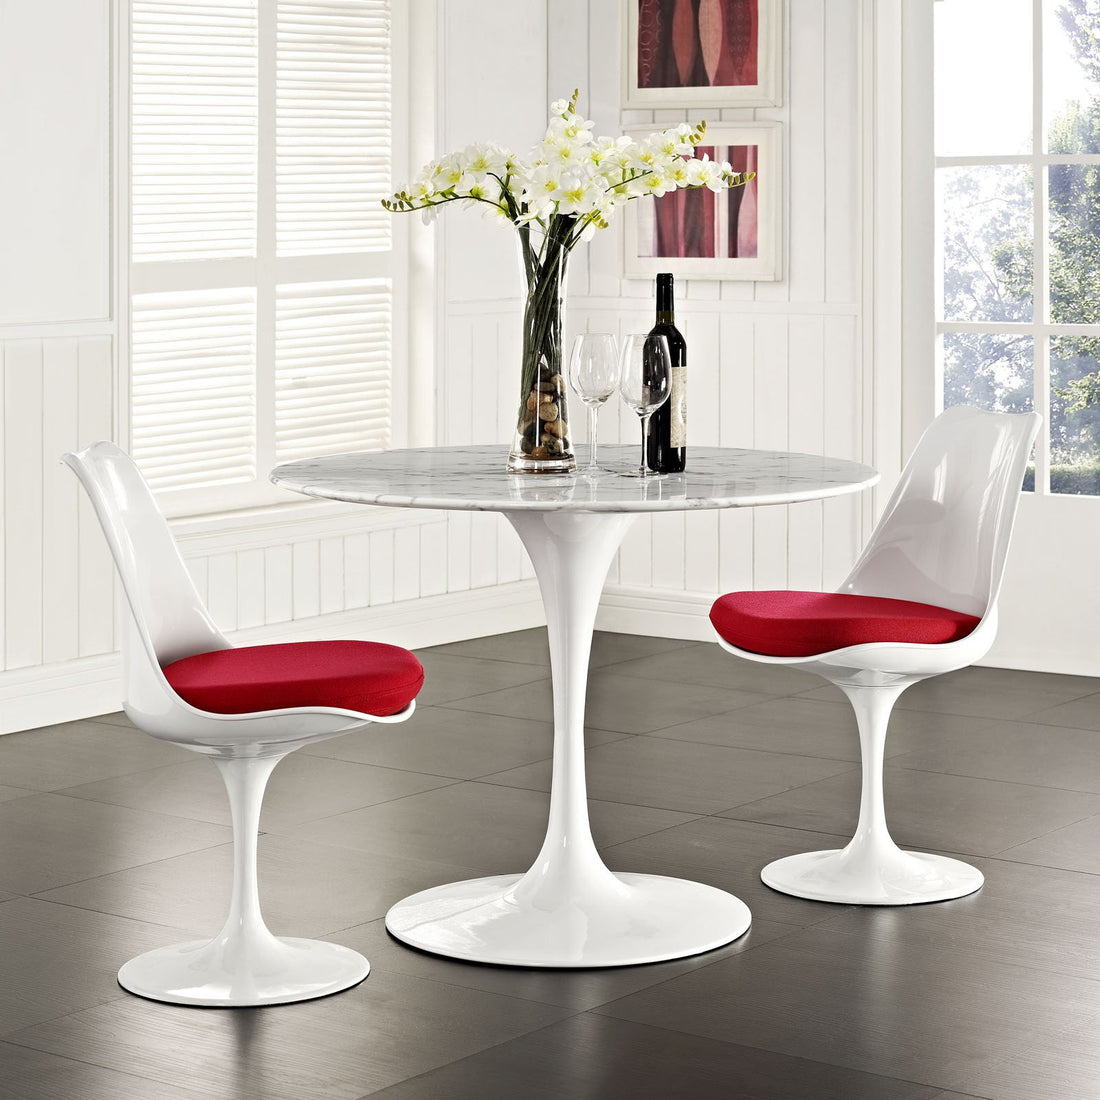 8 Reasons Why You Should Own a Tulip Table Replica Today